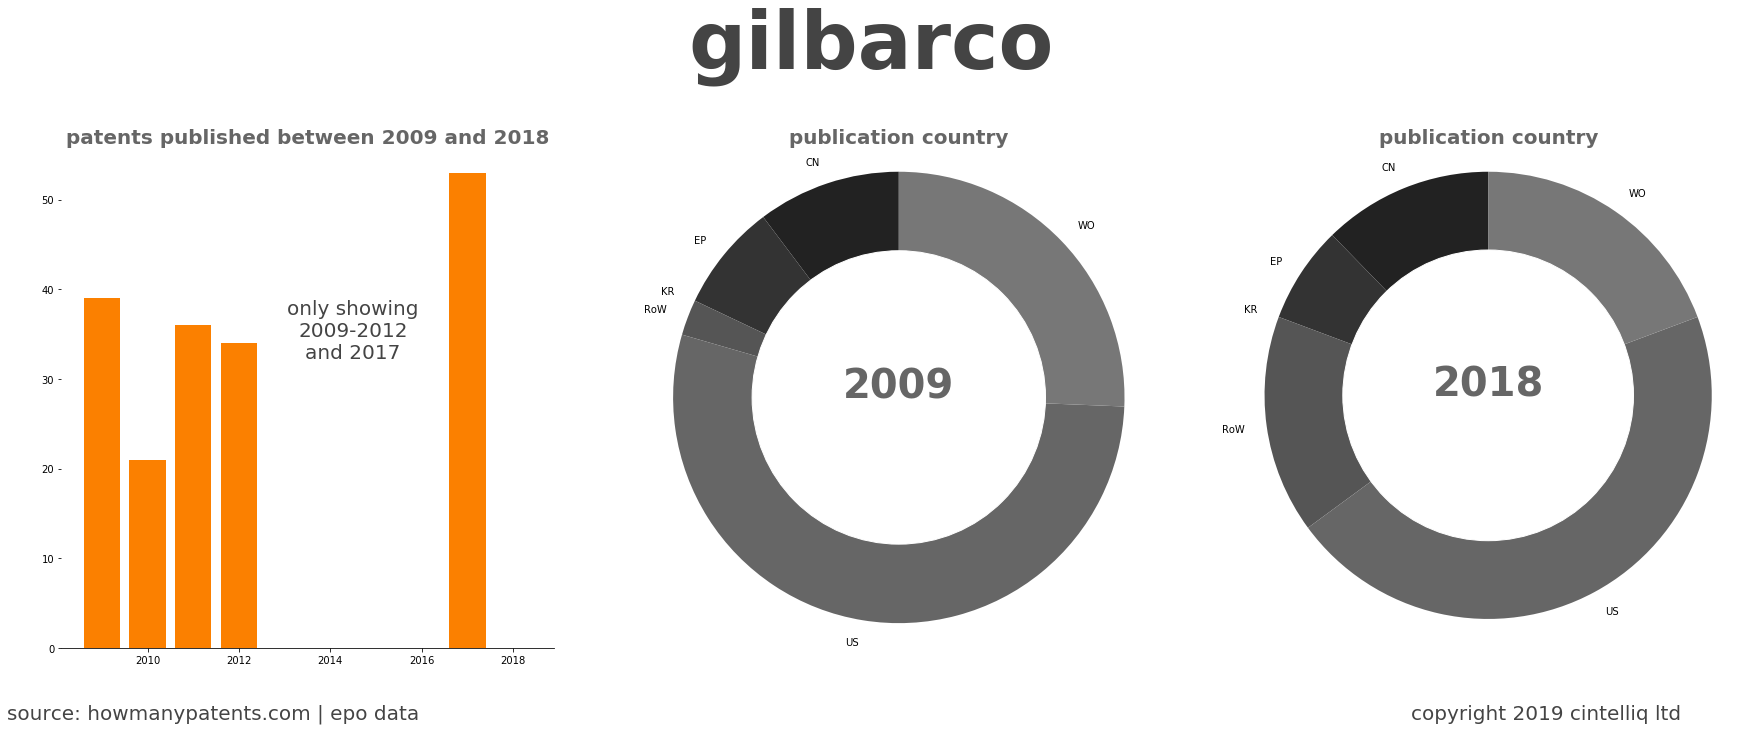 summary of patents for Gilbarco